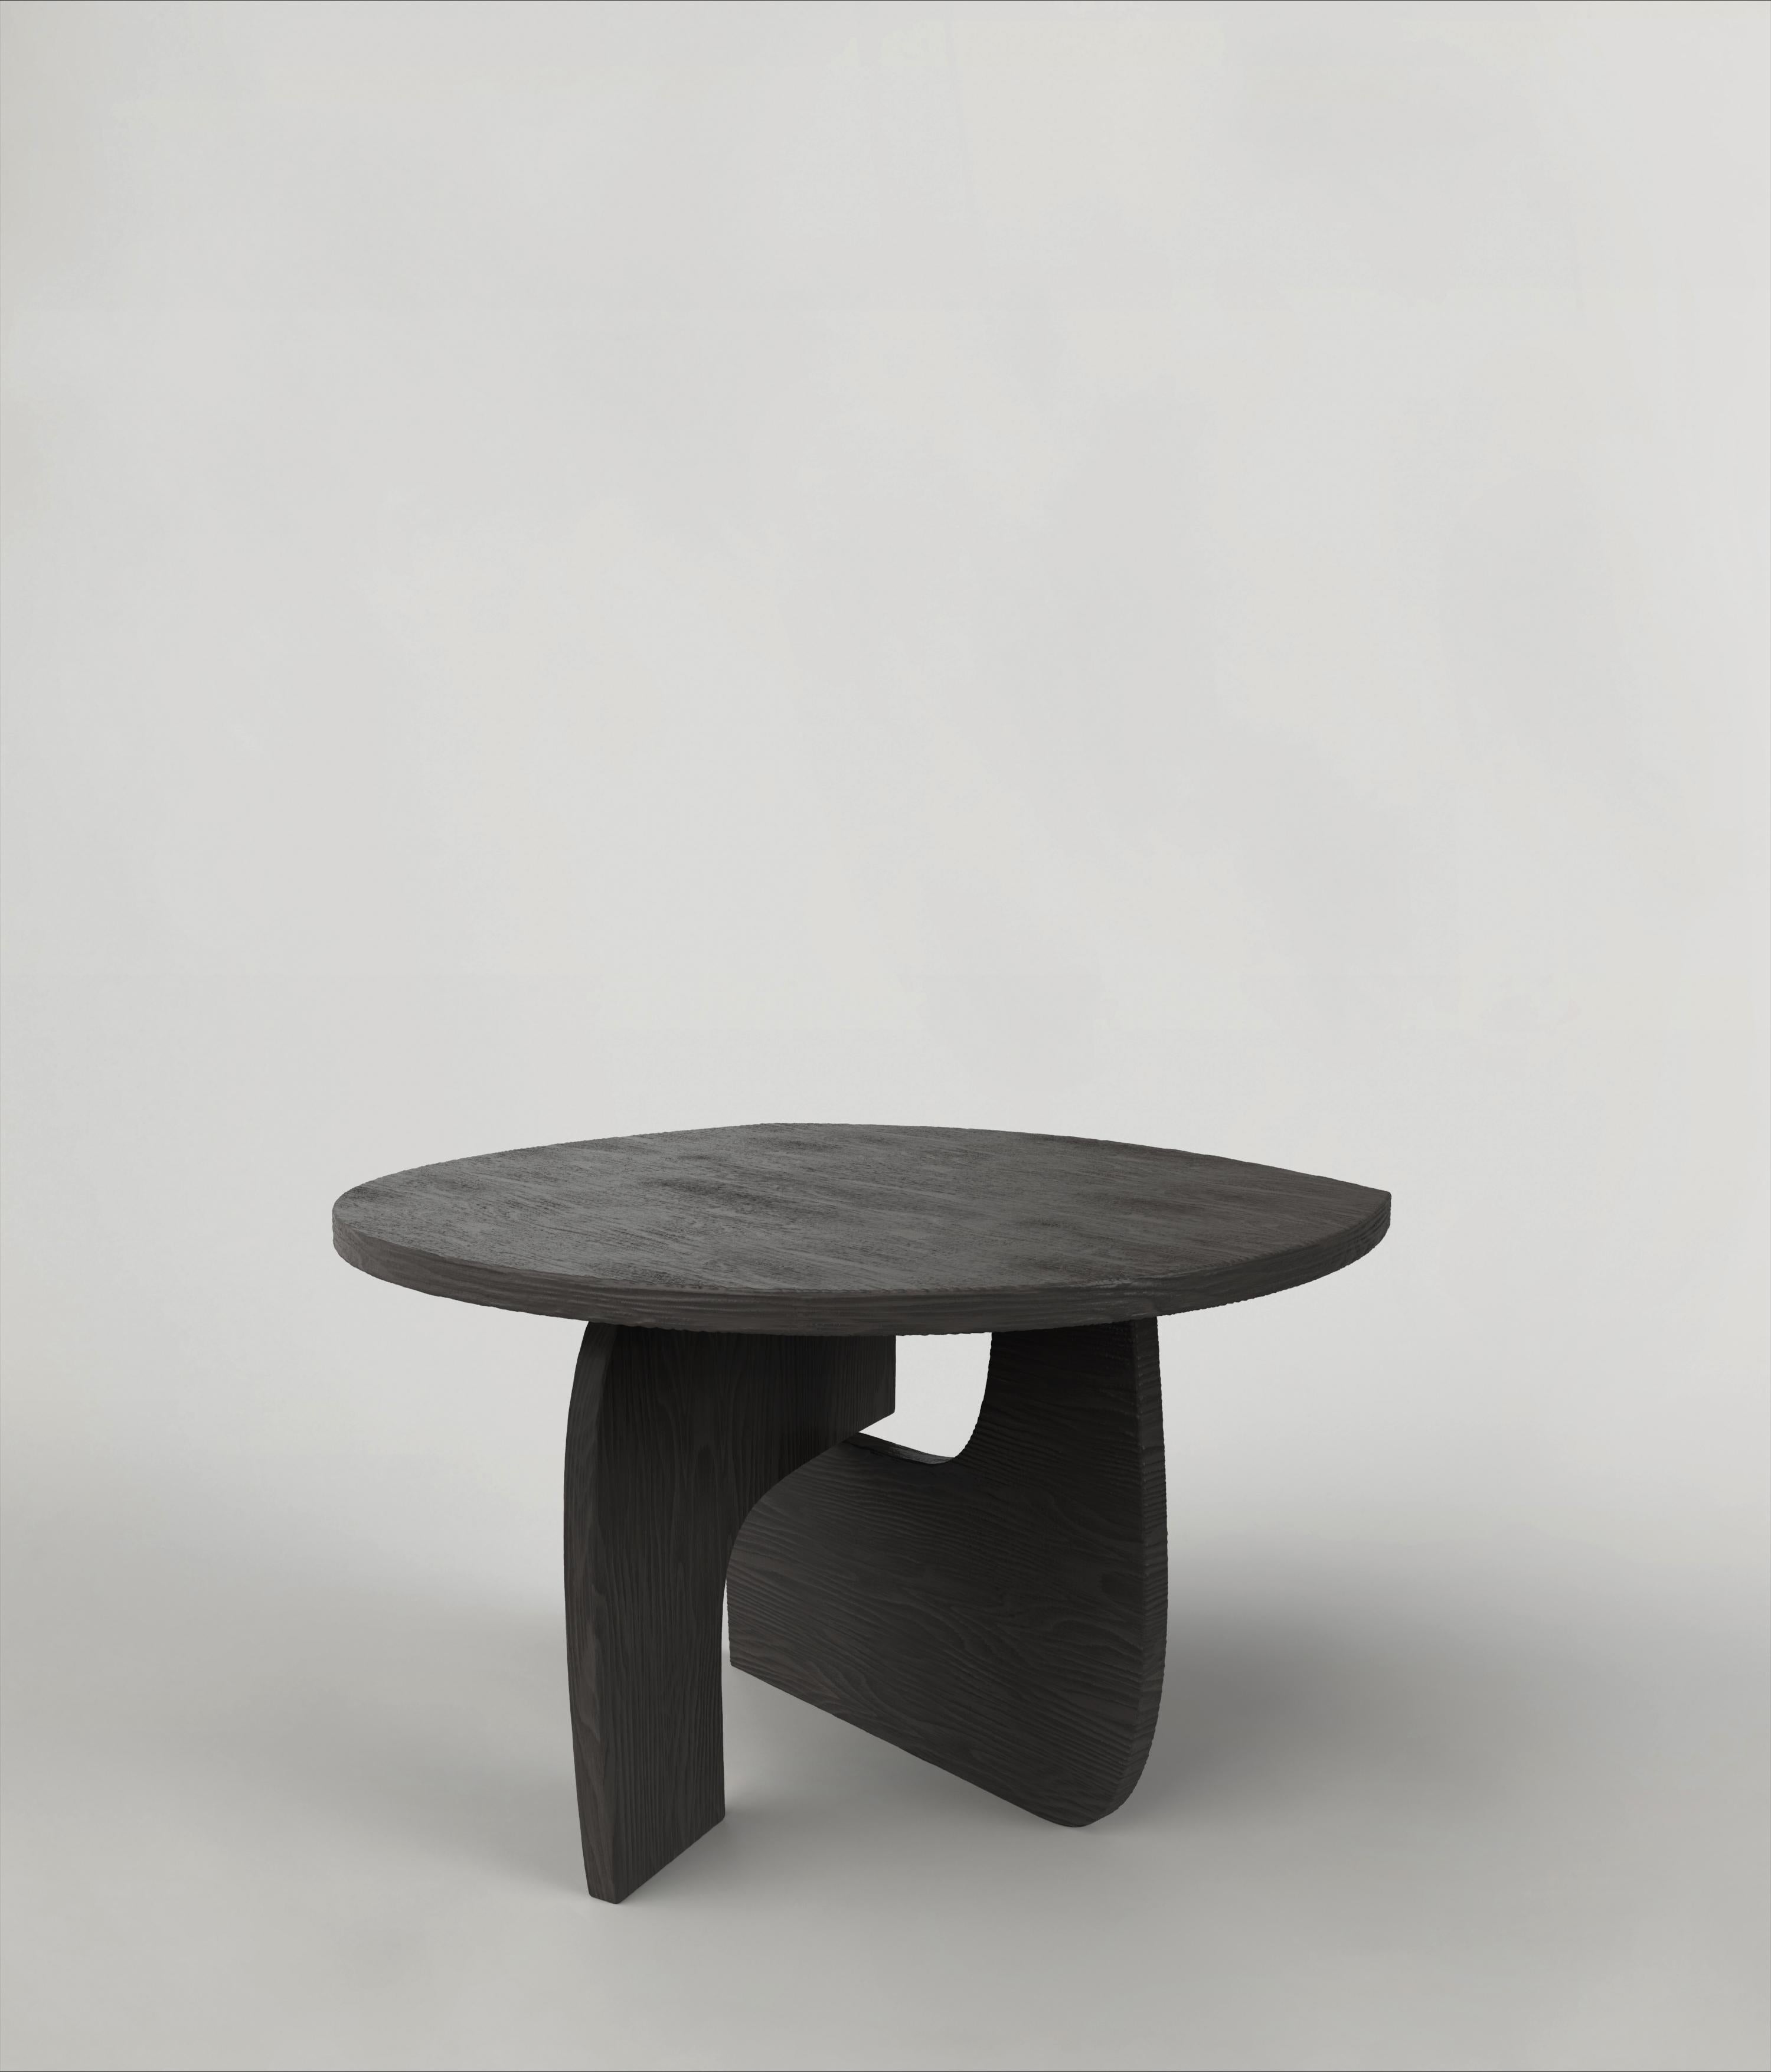 Reef V2 Table by Edizione Limitata
Limited Edition of 150 pieces. Signed and numbered.
Dimensions: D120 x W120 x H75 cm
Materials: Charred Cedar Wood

This contemporary LANGUAGE is a product of Italian craftmanship, starting from Cedar planks, the